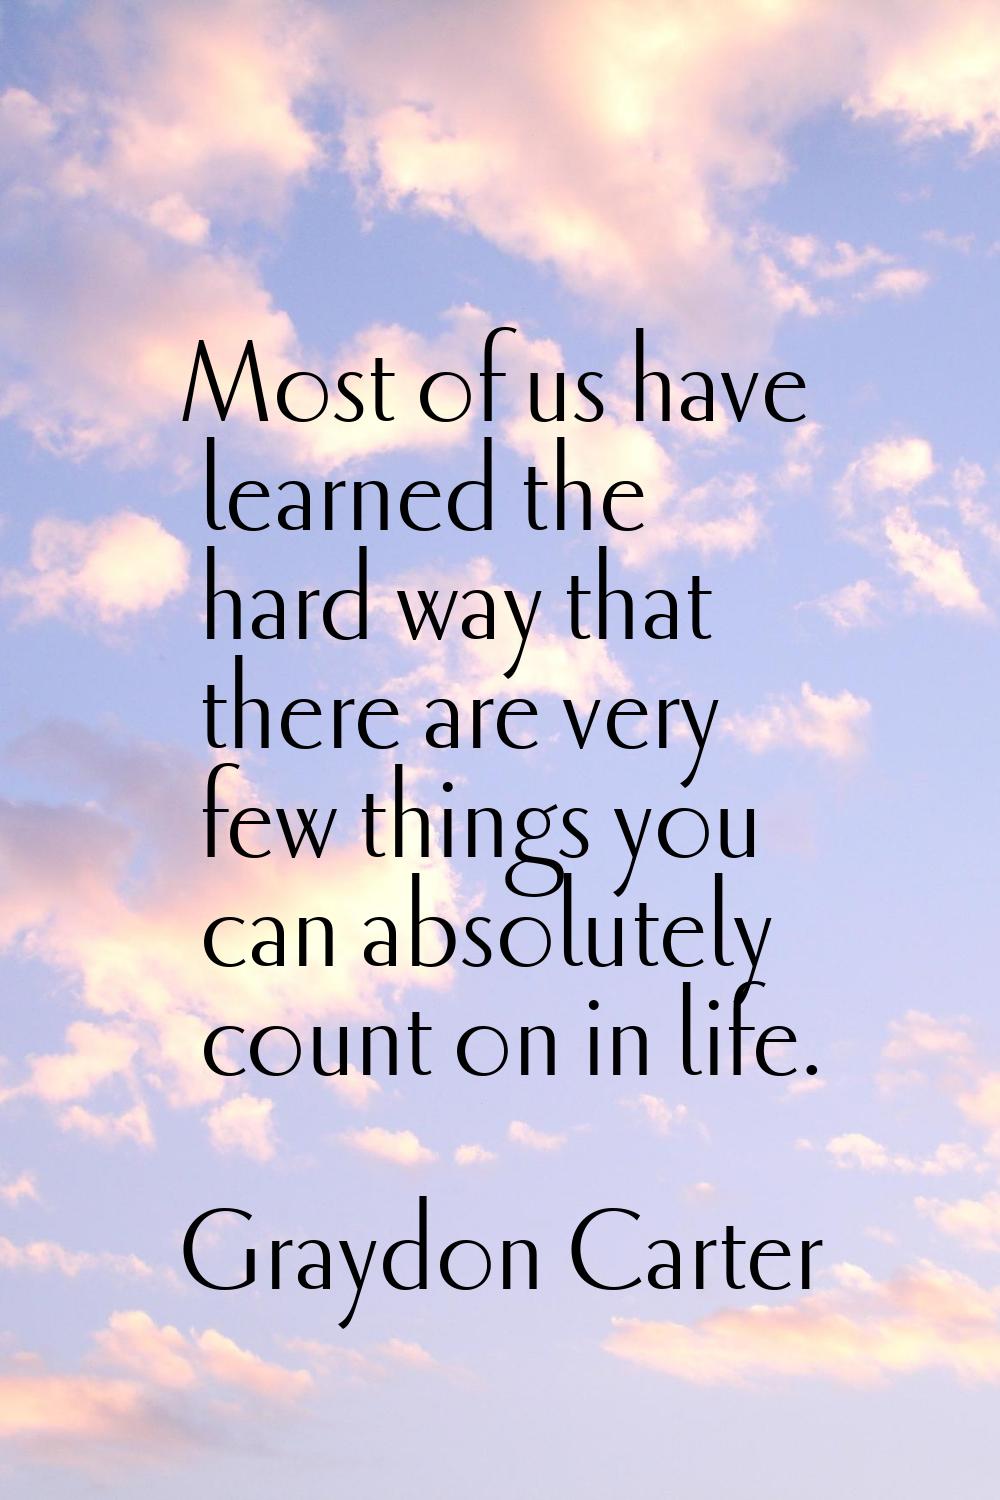 Most of us have learned the hard way that there are very few things you can absolutely count on in 